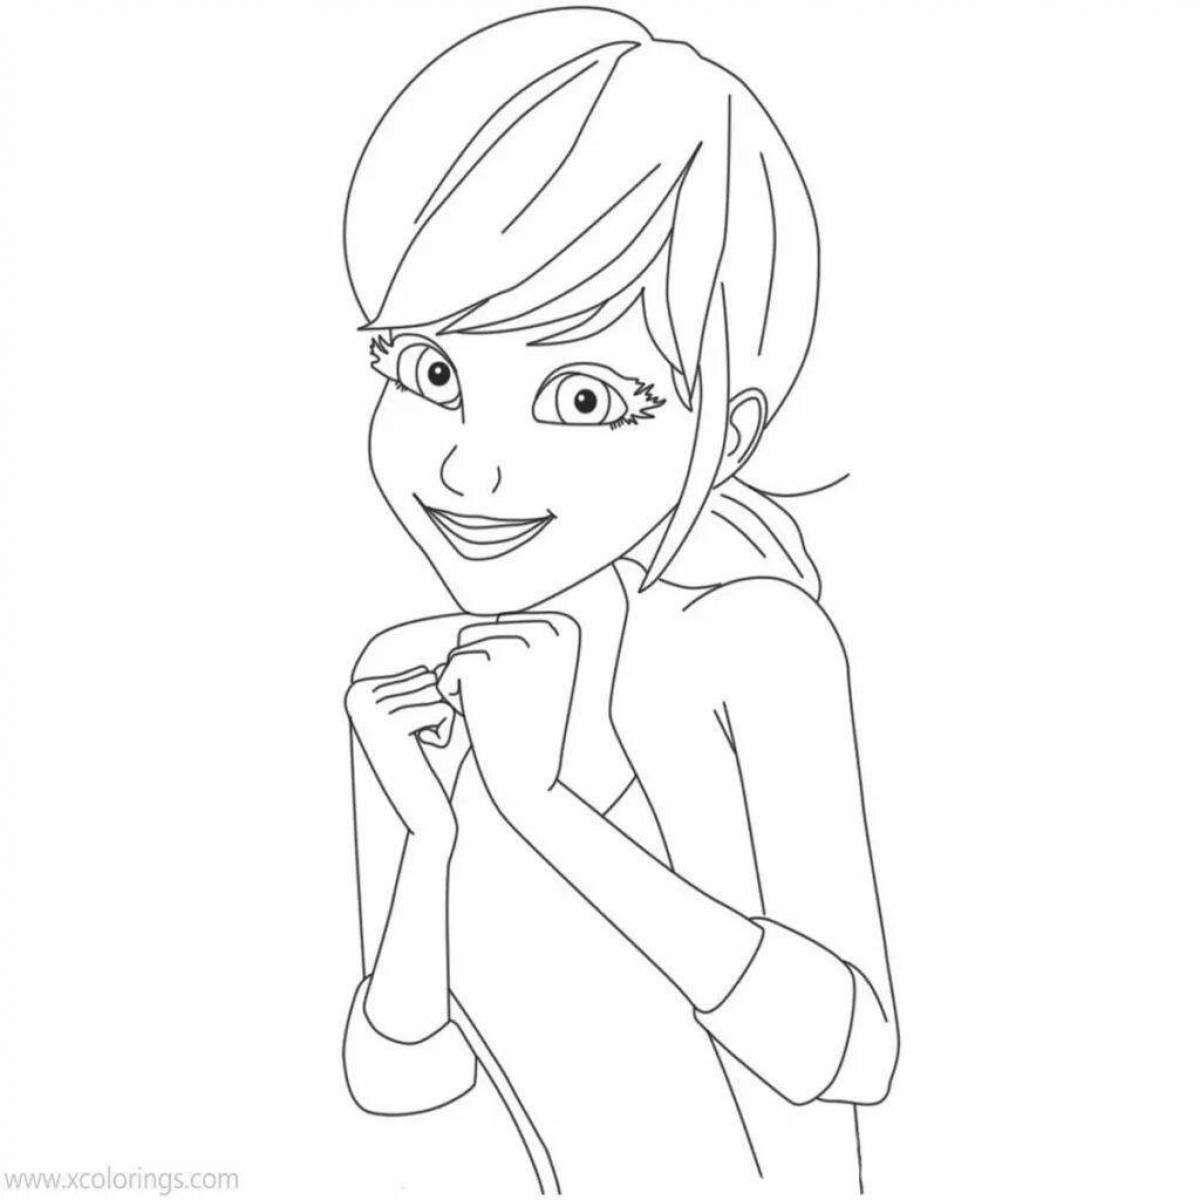 Chloe's playful coloring page